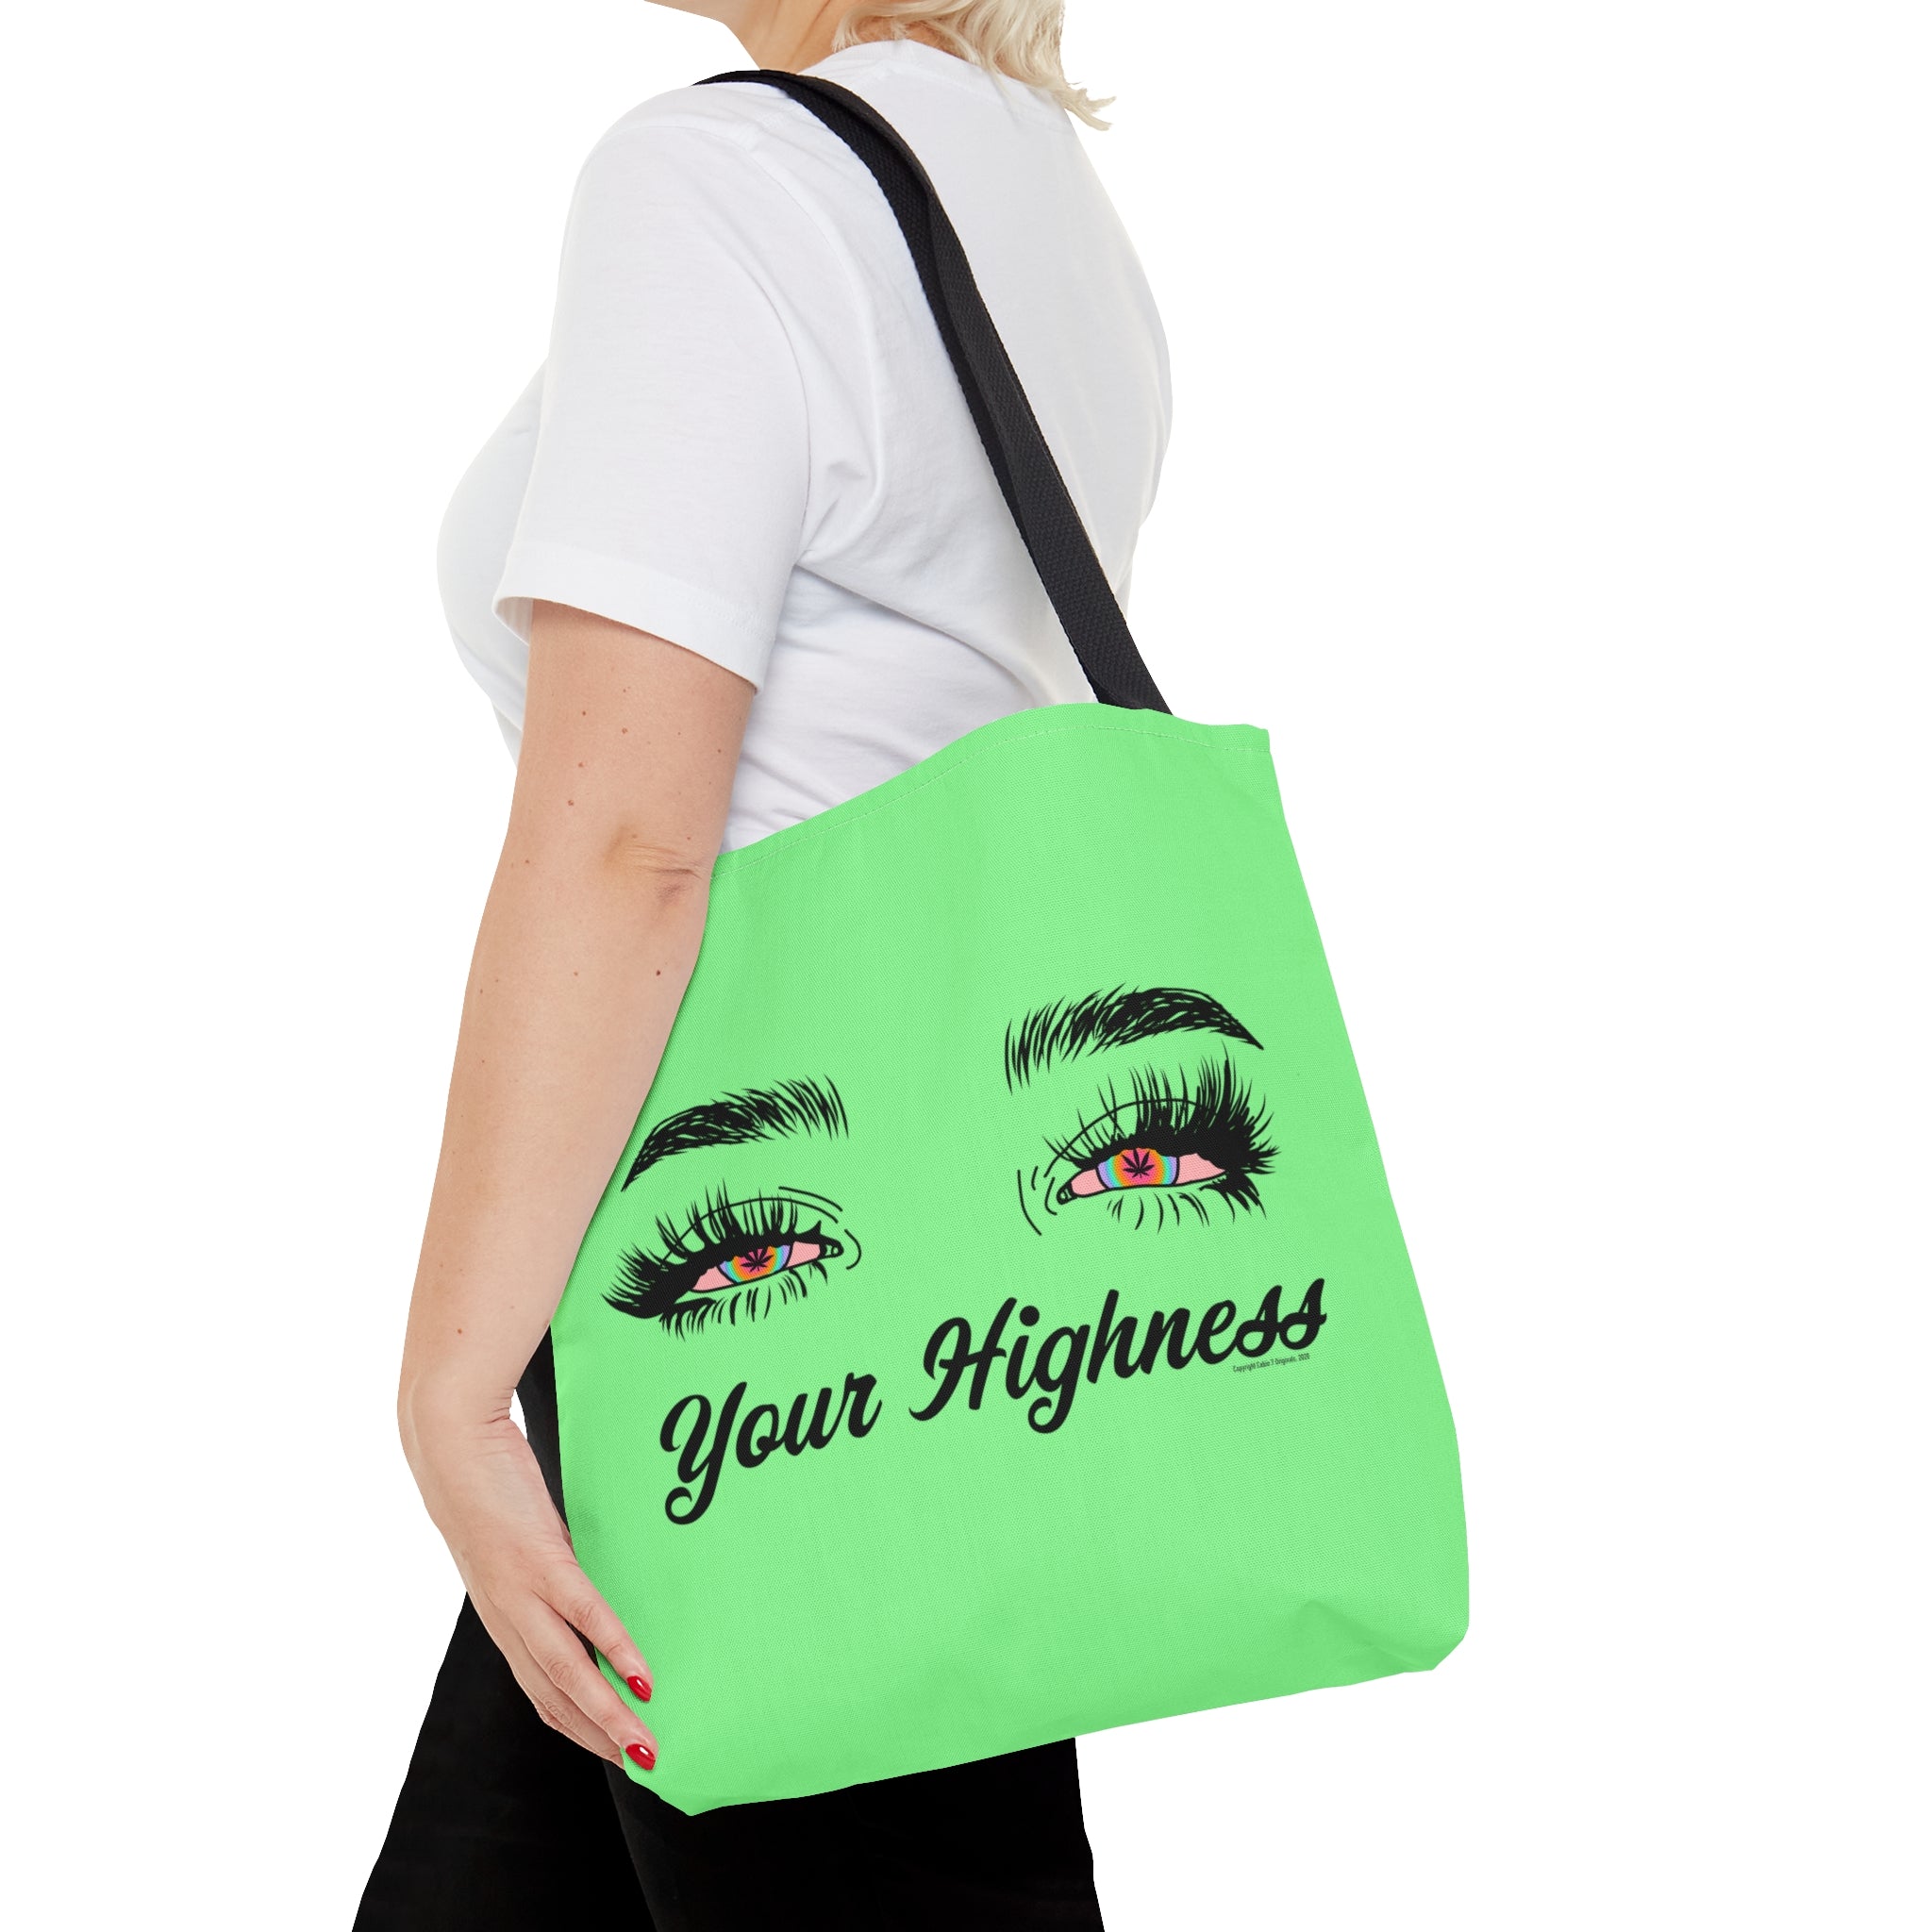 Your Highness Tote Bag